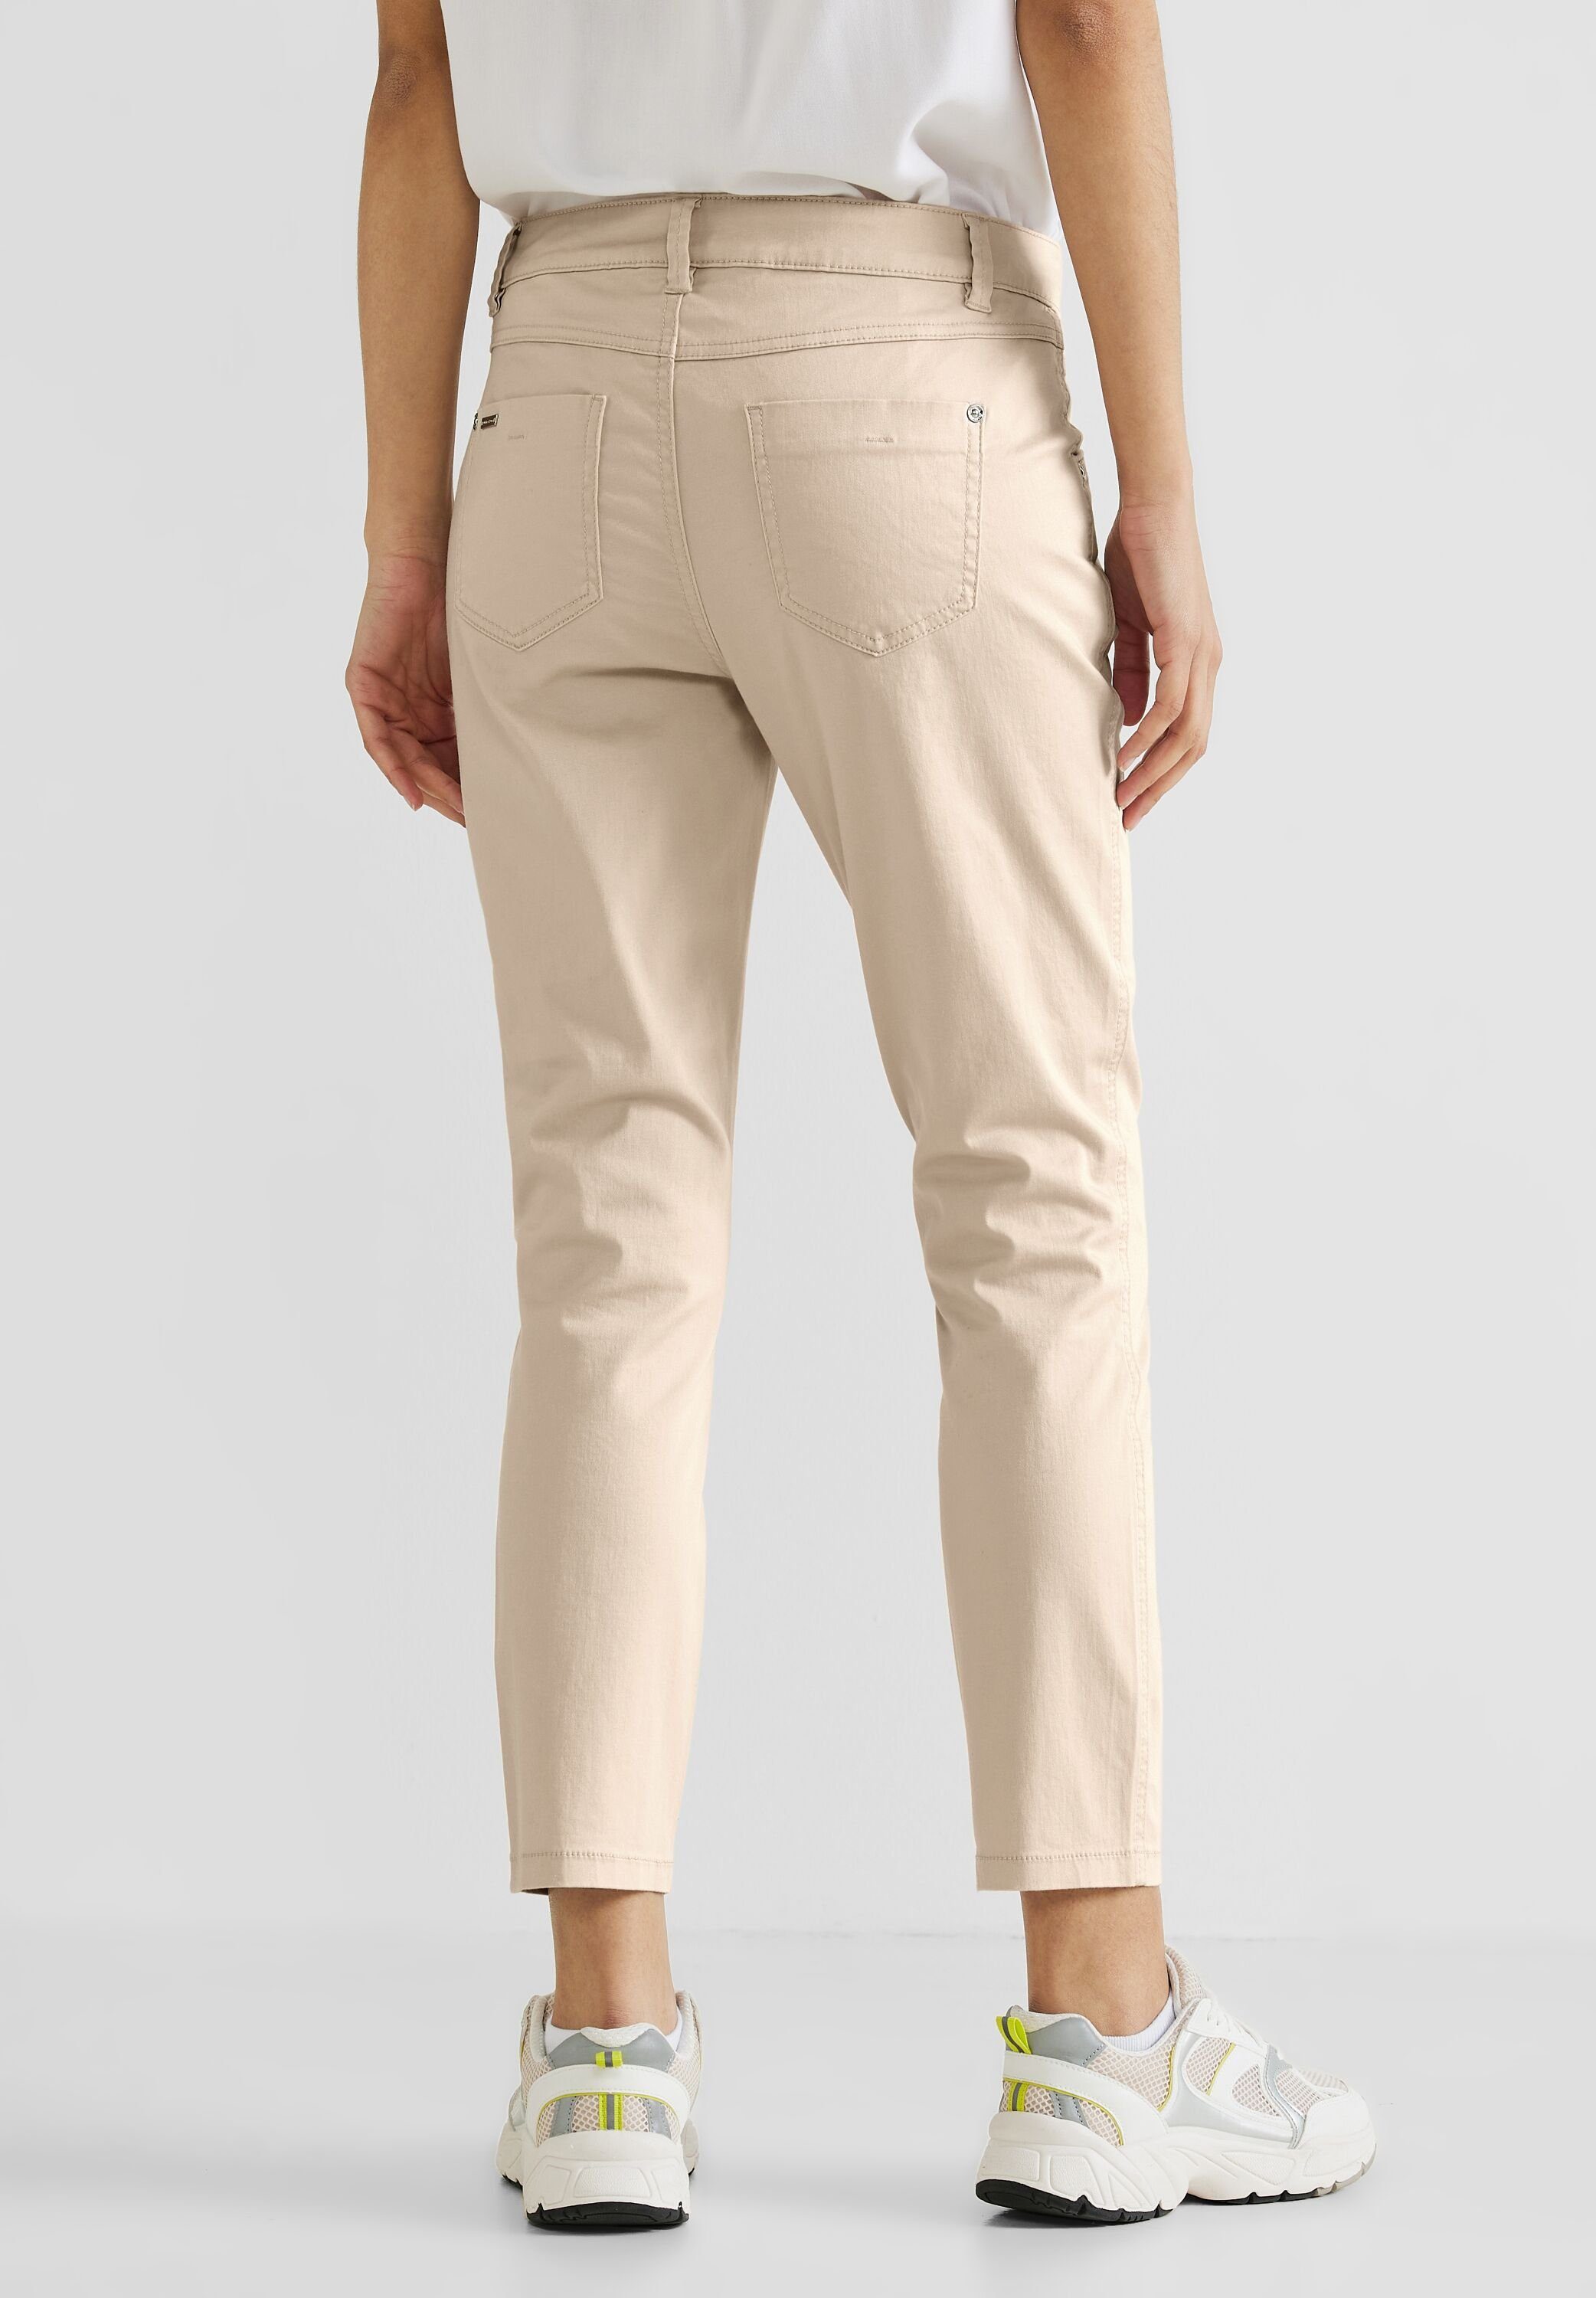 Hose Damen Style, ONE Casual in Stoffhose Fit 7/8-Länge STREET 4-Pocket